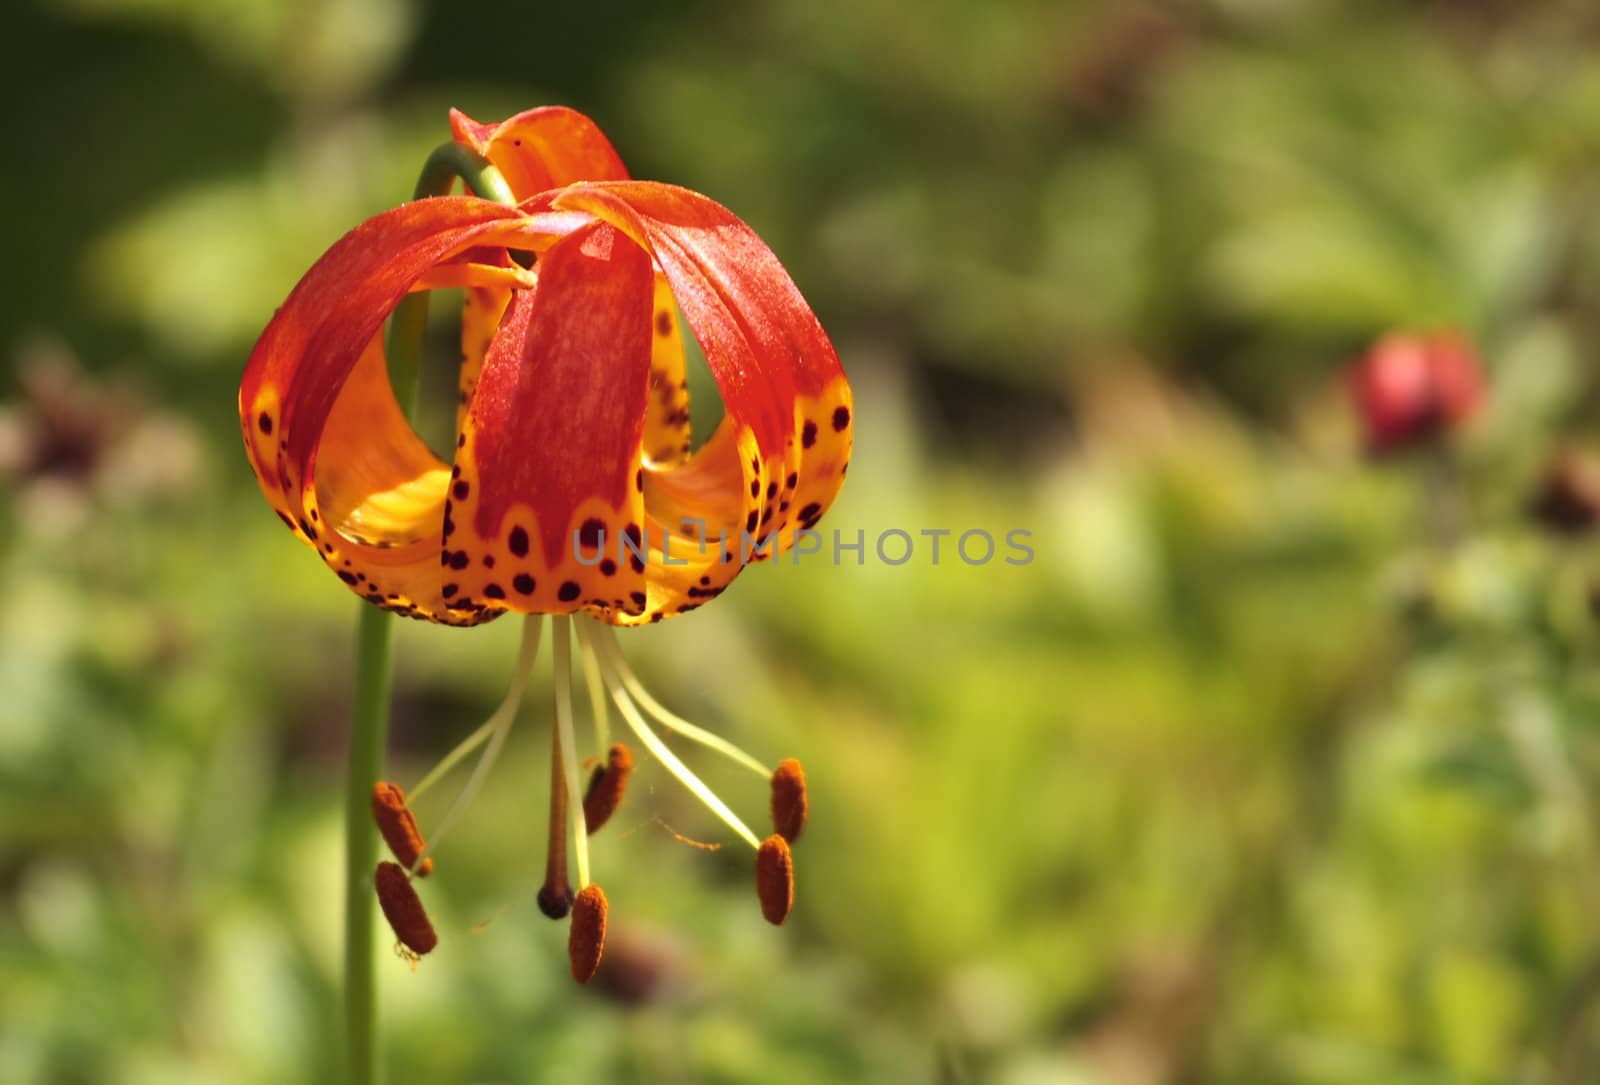 lilium pardalinum is one of the lilies which curl its petals right back to expose its stamens